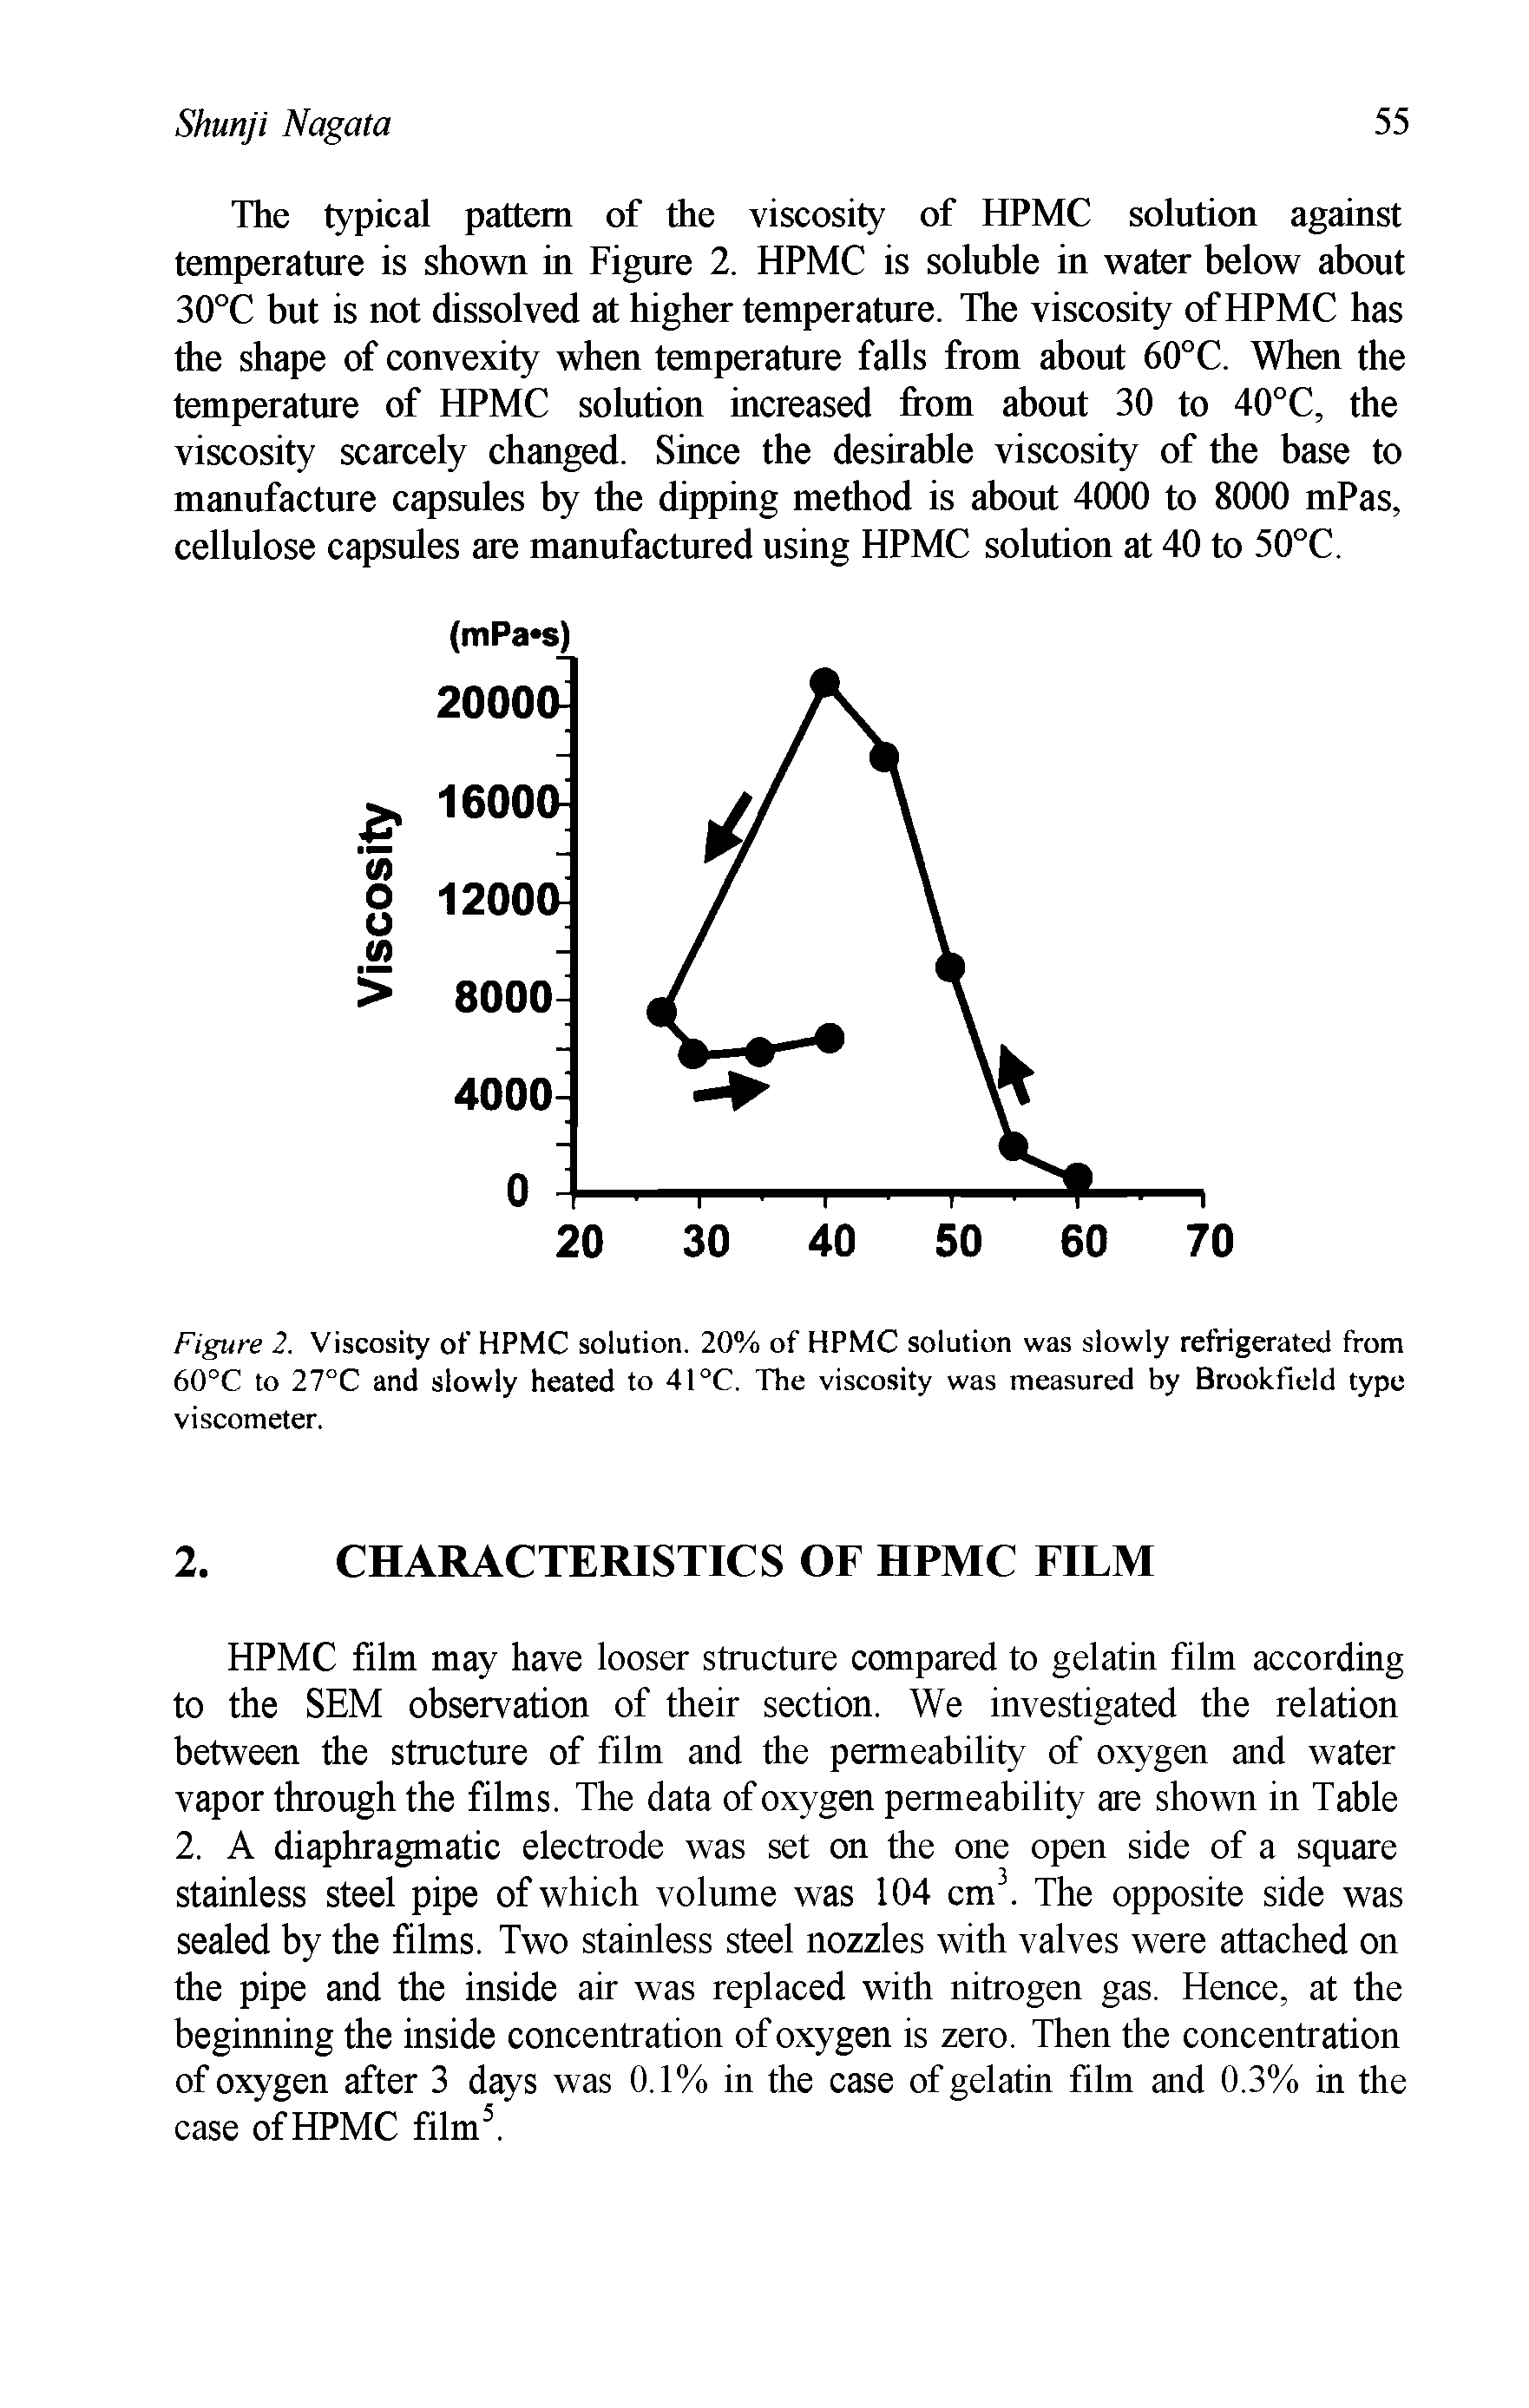 Figure 2. Viscosity of HPMC solution. 20% of HPMC solution was slowly refrigerated from 60°C to 27°C and slowly heated to 41 C. The viscosity was measured by Brookfield type viscometer.